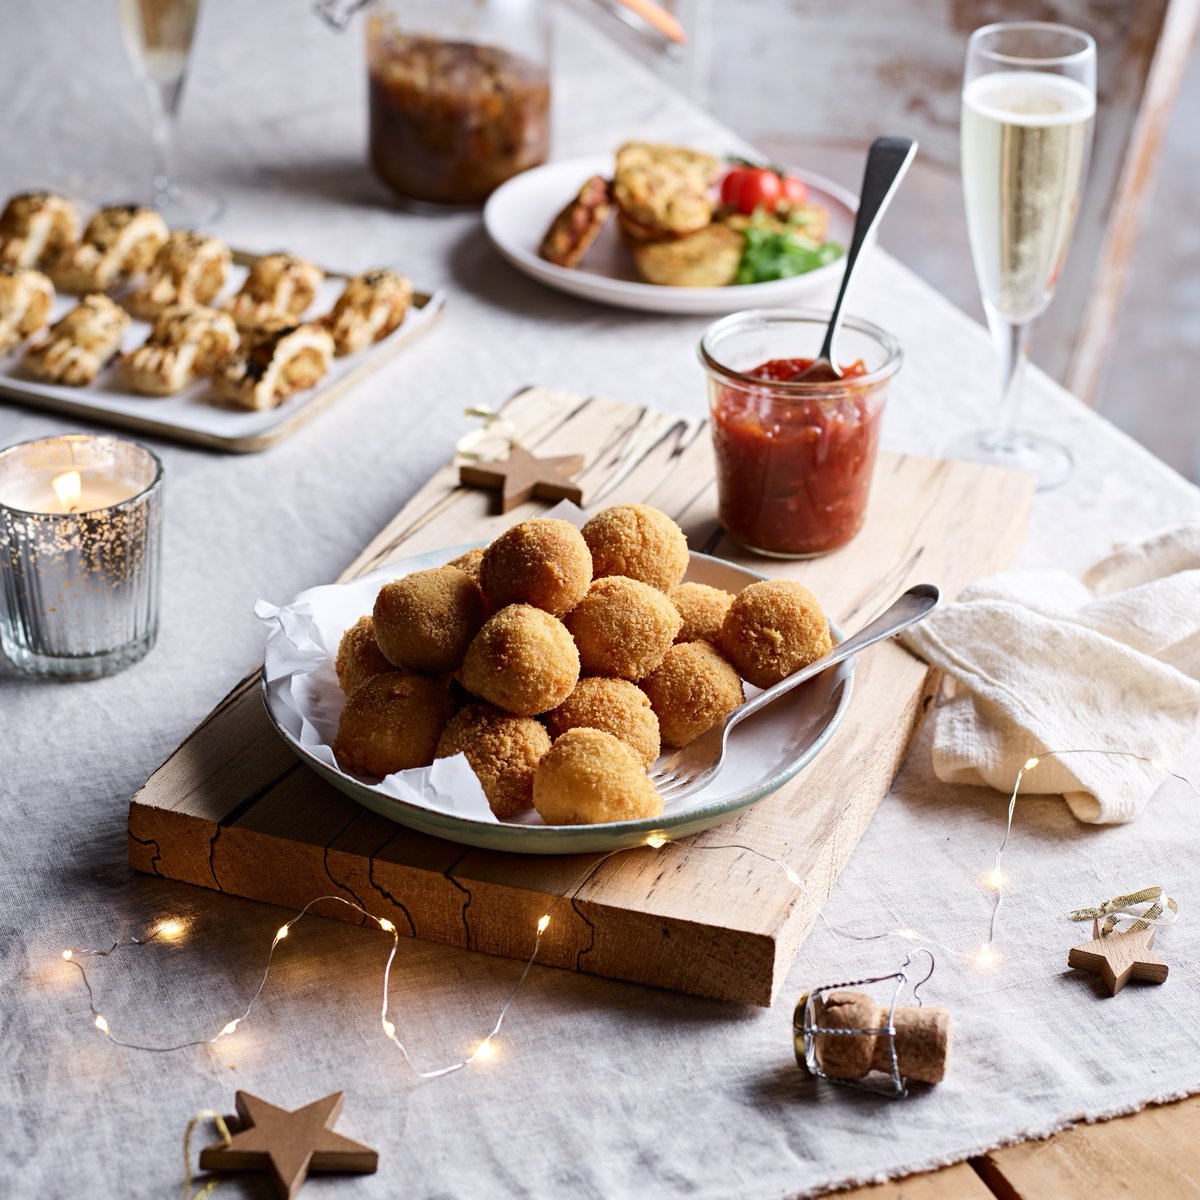 It's beginning to look a lot like #Christmas! Over the next couple of weeks we will be sharing a selection of compliment worthy #festive recipes... First up - Cheddar & Chorizo Croquettes. wykefarms.com/recipe/cheddar… @coopuk @glastonbury